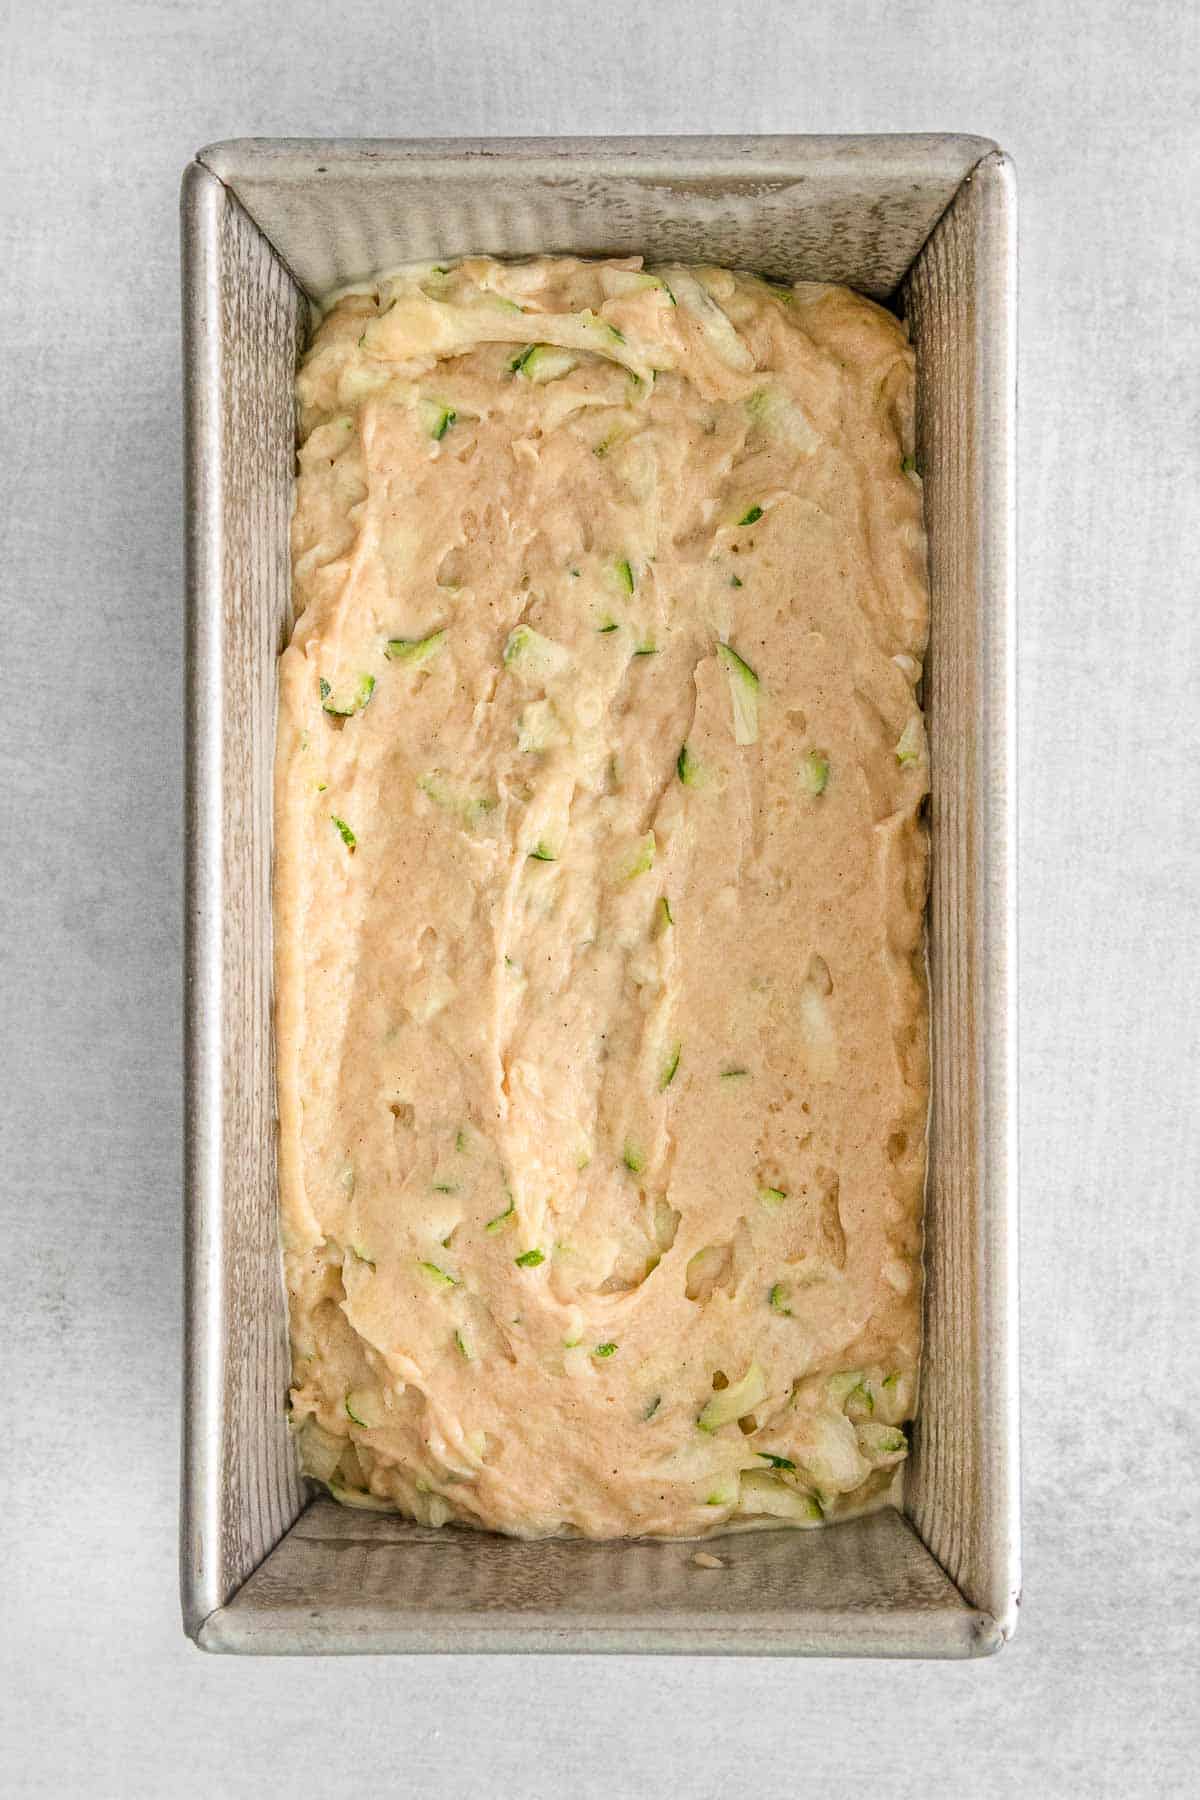 Zucchini bread batter evenly spread in loaf pan.